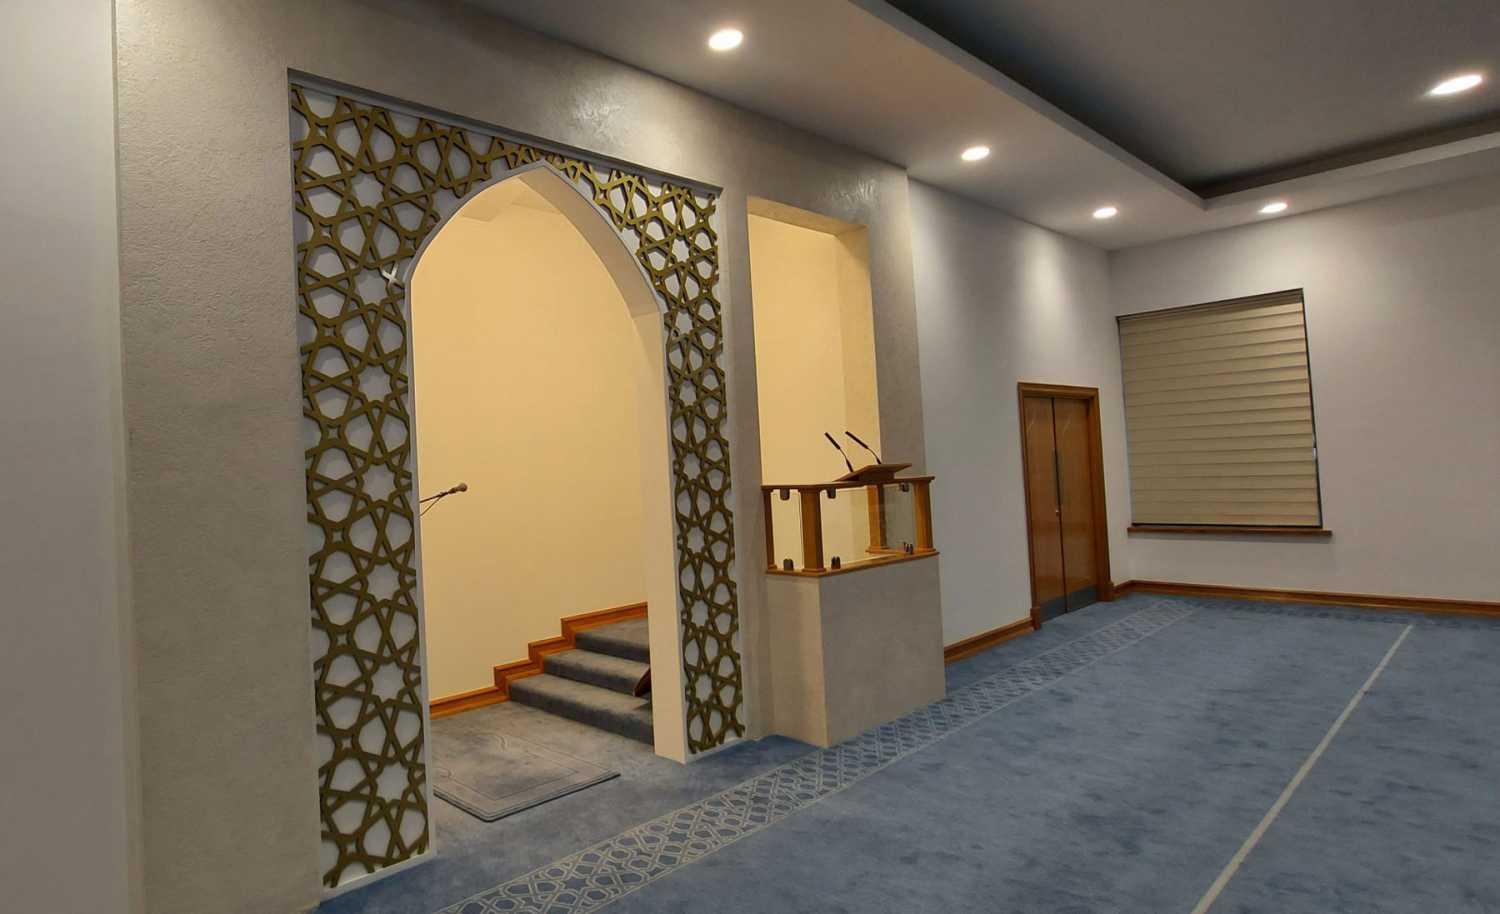 Fastline specialises in mosque installations